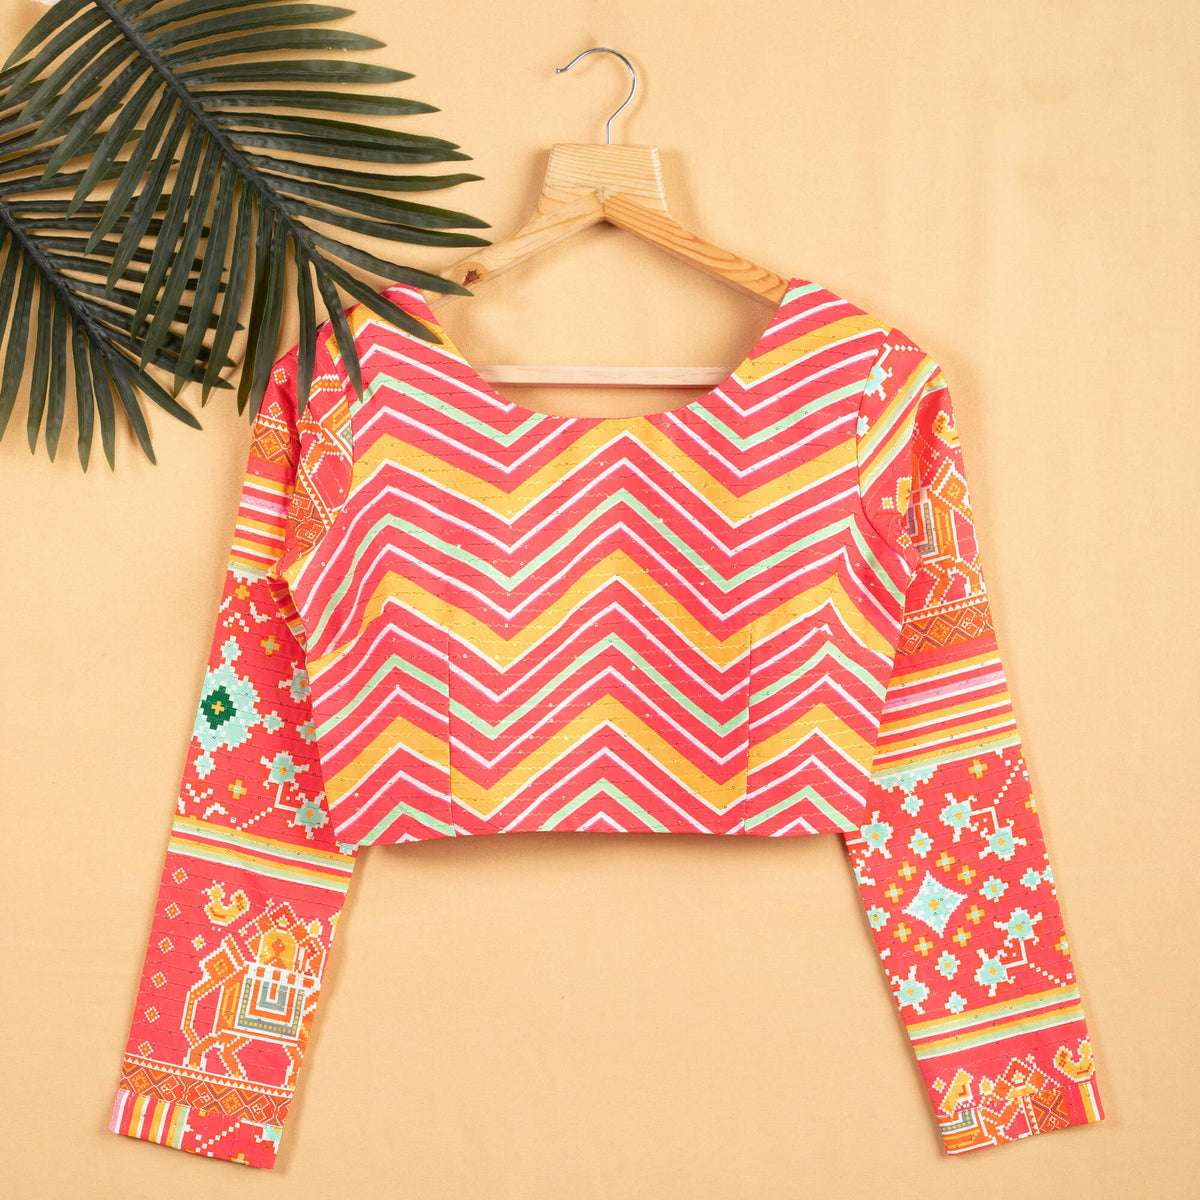 Traditional Chevron Sequins Embroidery Blouse